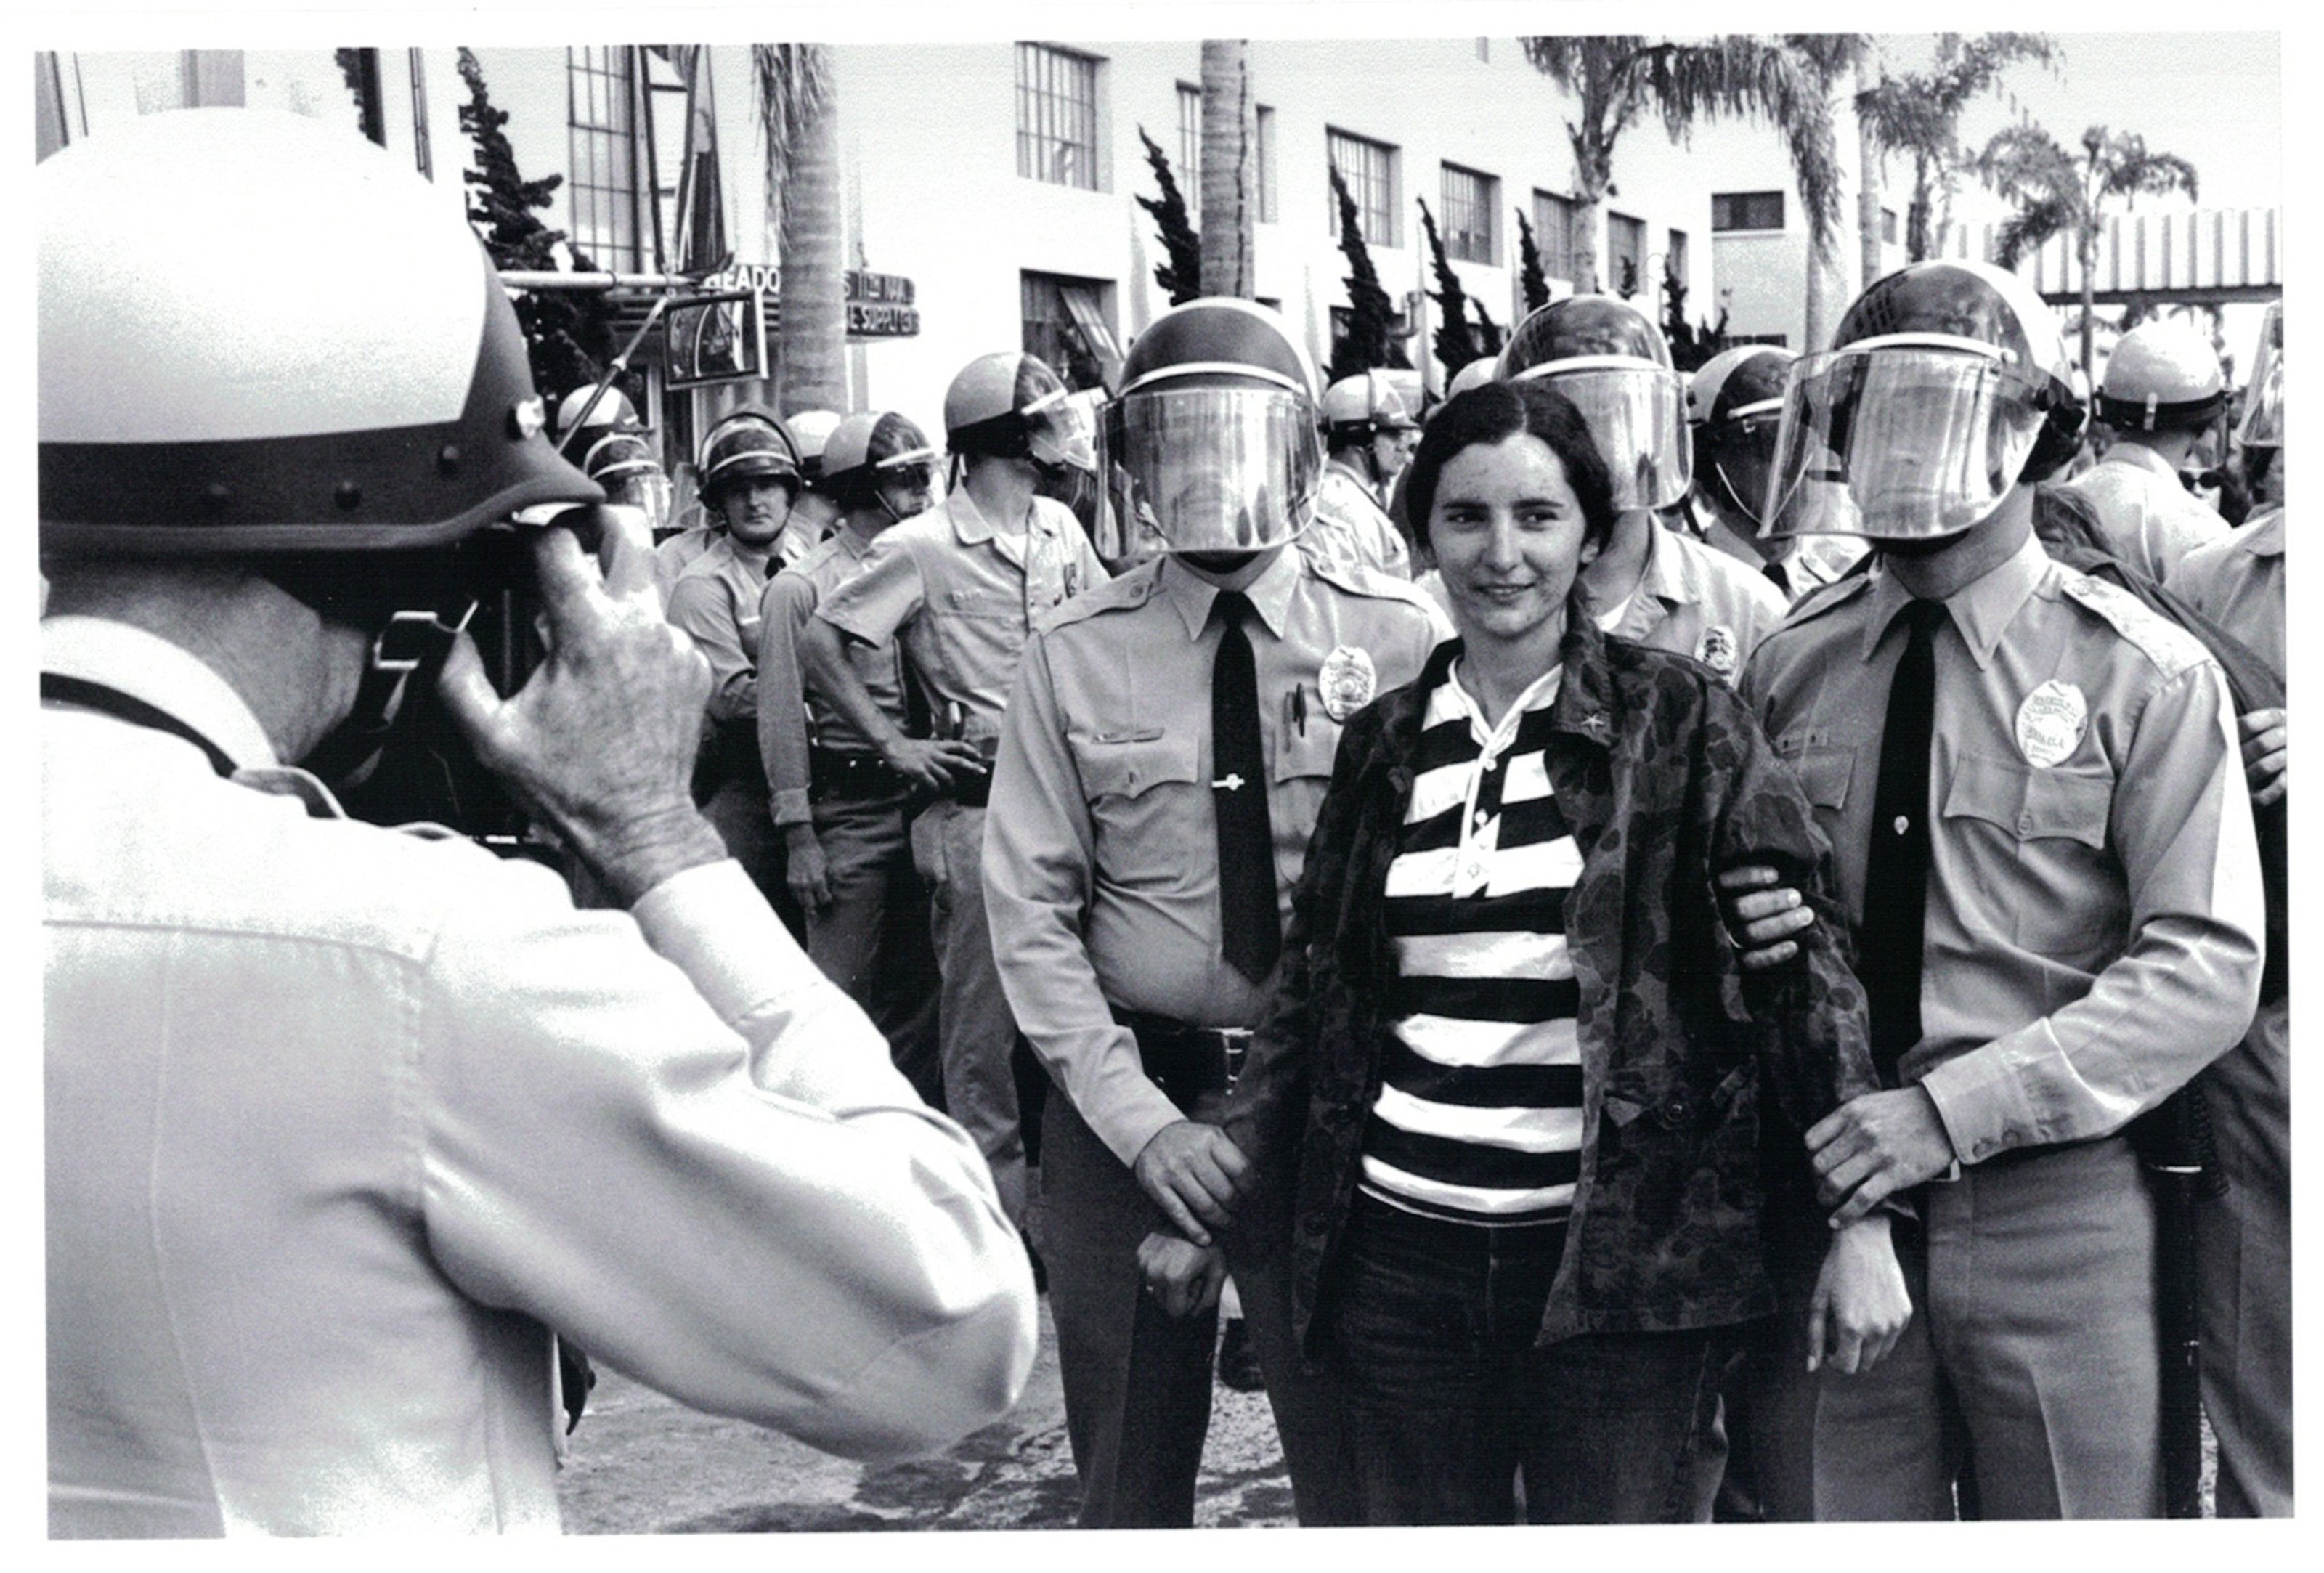 A black and white photo of the police arresting a female